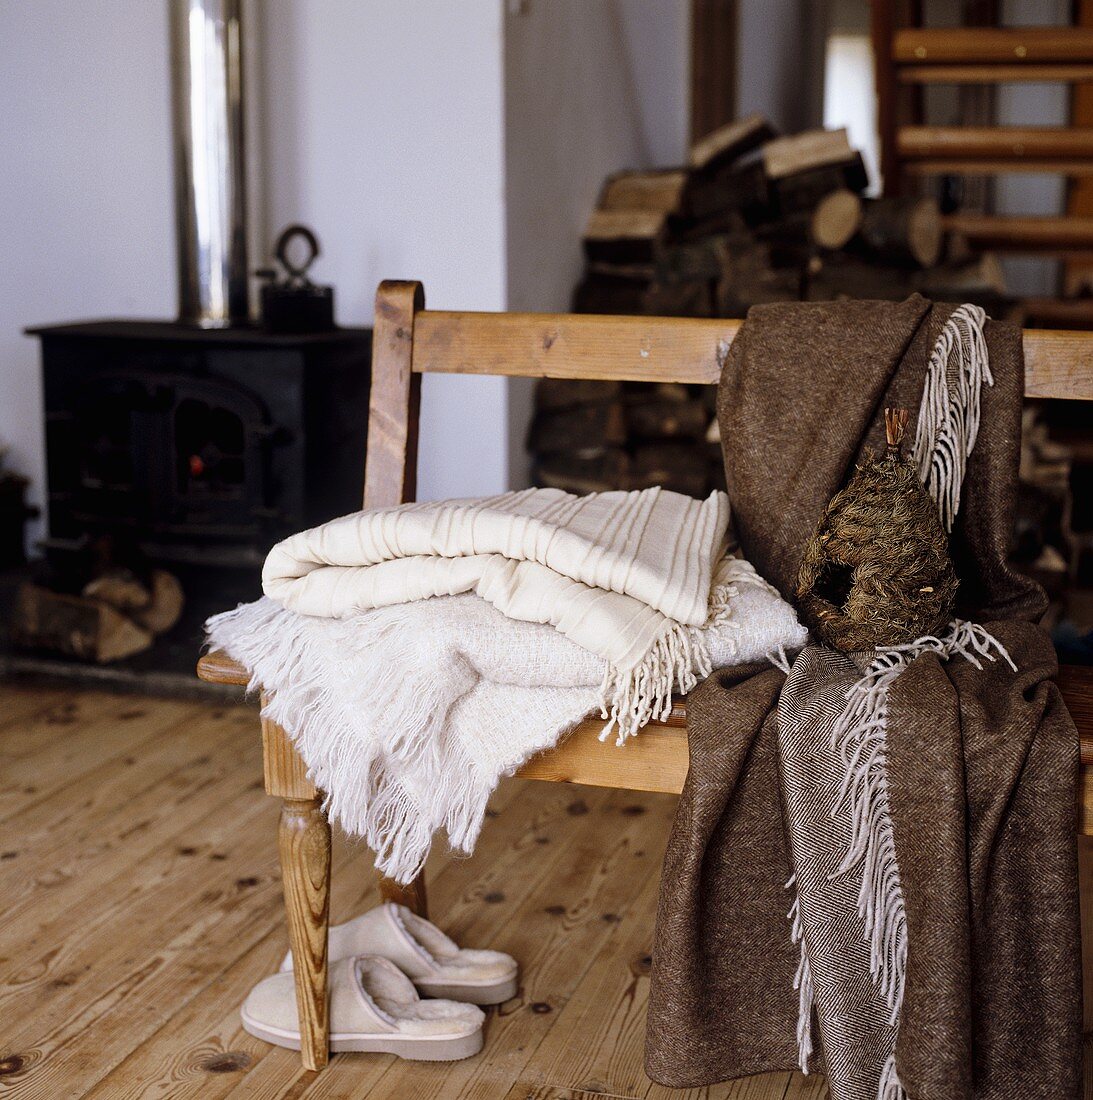 Wooden bench with blankets in a country house